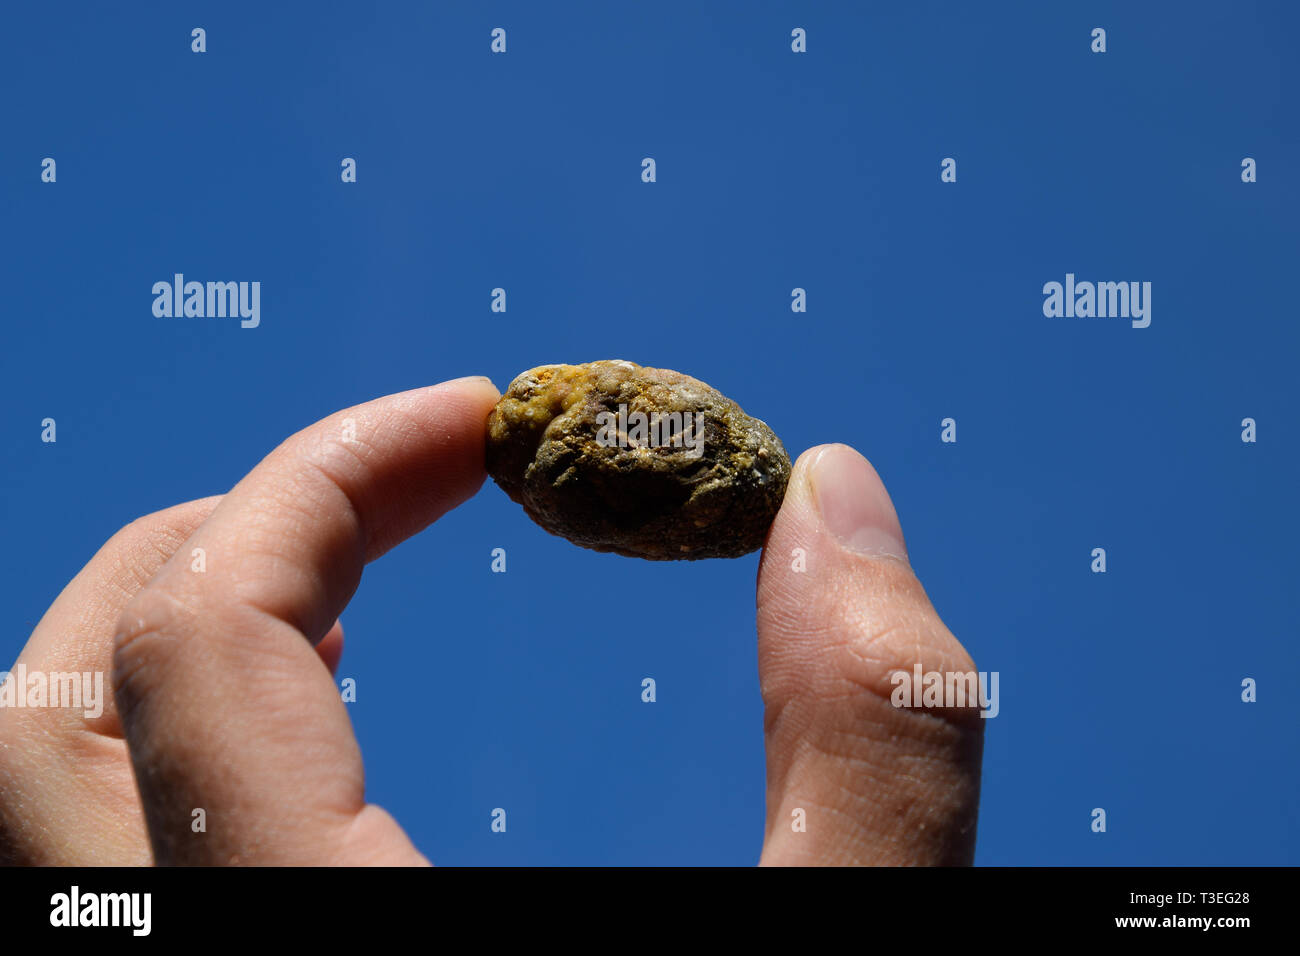 Stone of the gallbladder. The result of gallstones. A calculus of heterogeneous composition against a blue sky. Stock Photo